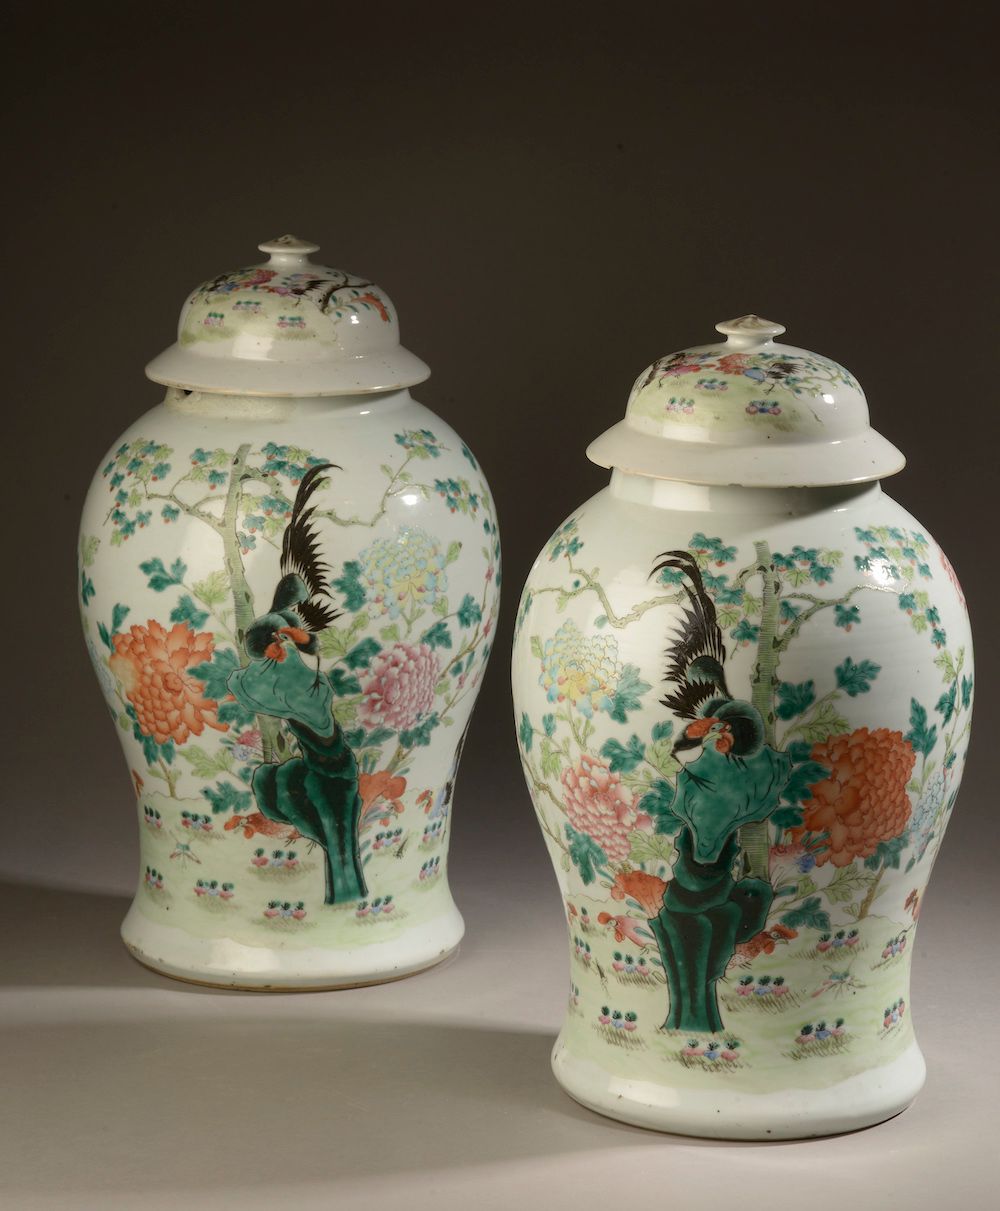 Null CHINA - Circa 1900.

A pair of covered polychrome enamelled porcelain vases&hellip;